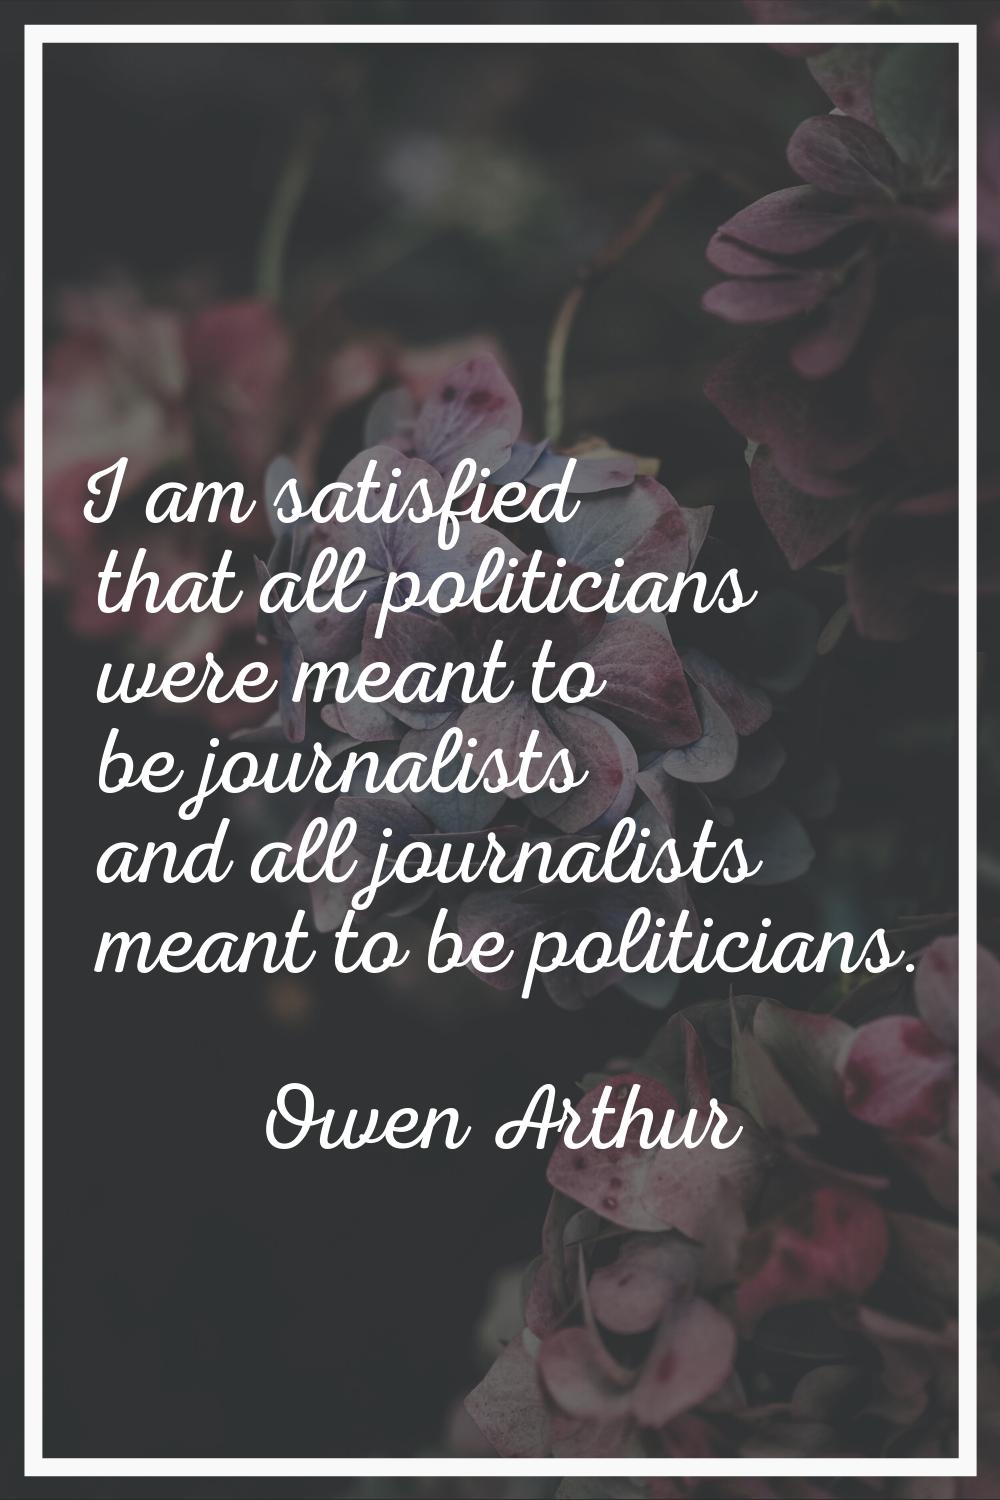 I am satisfied that all politicians were meant to be journalists and all journalists meant to be po